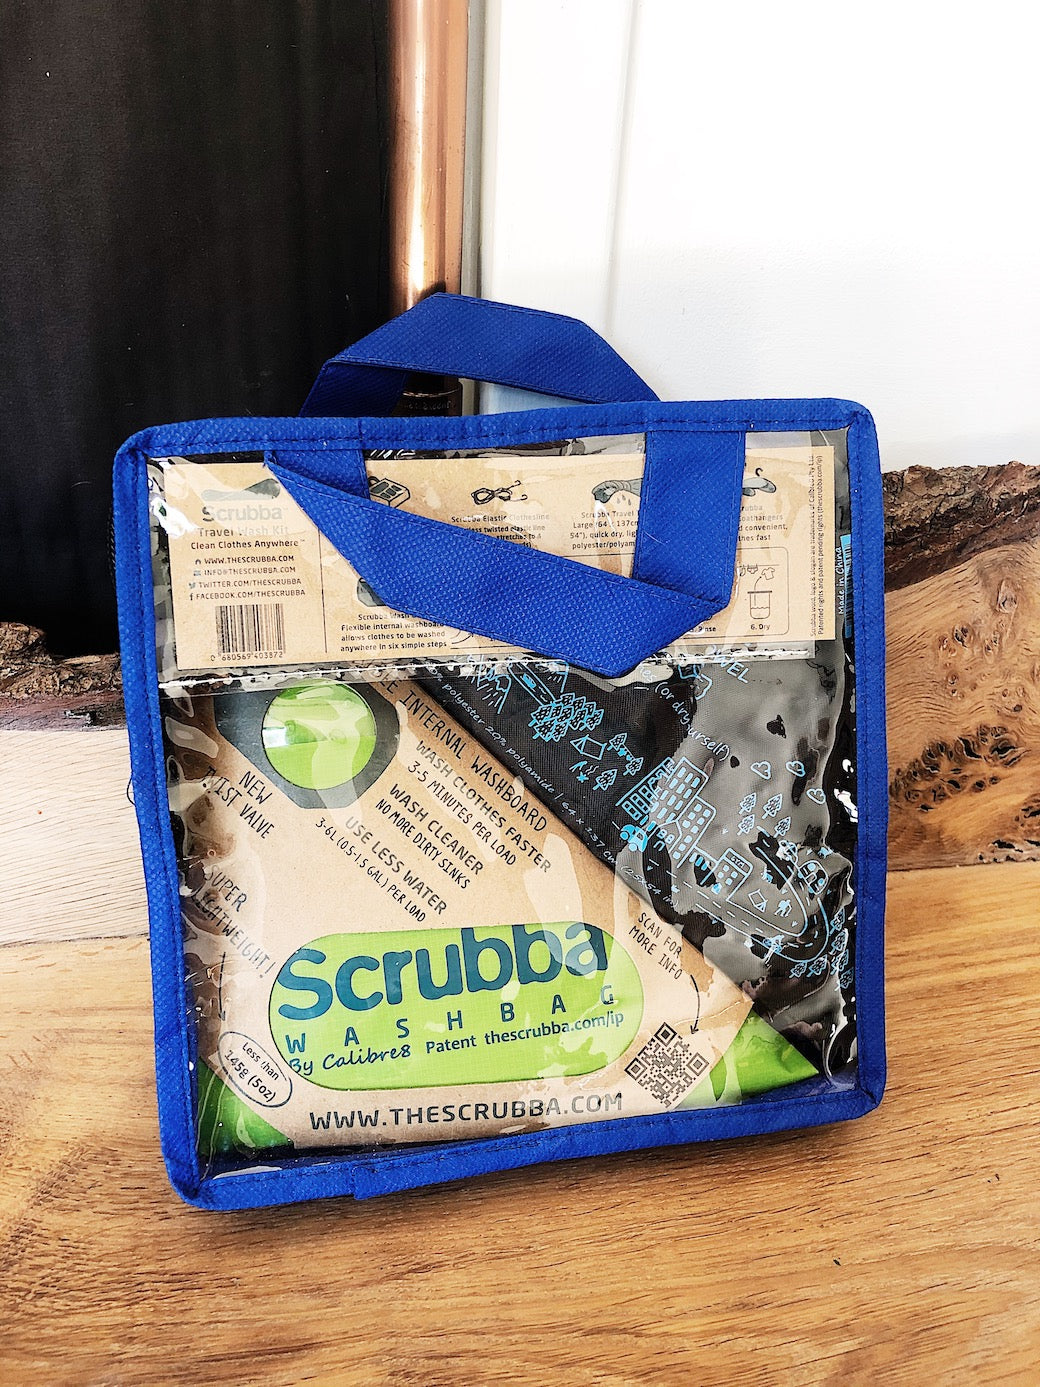 Scrubba Wash and dry kit